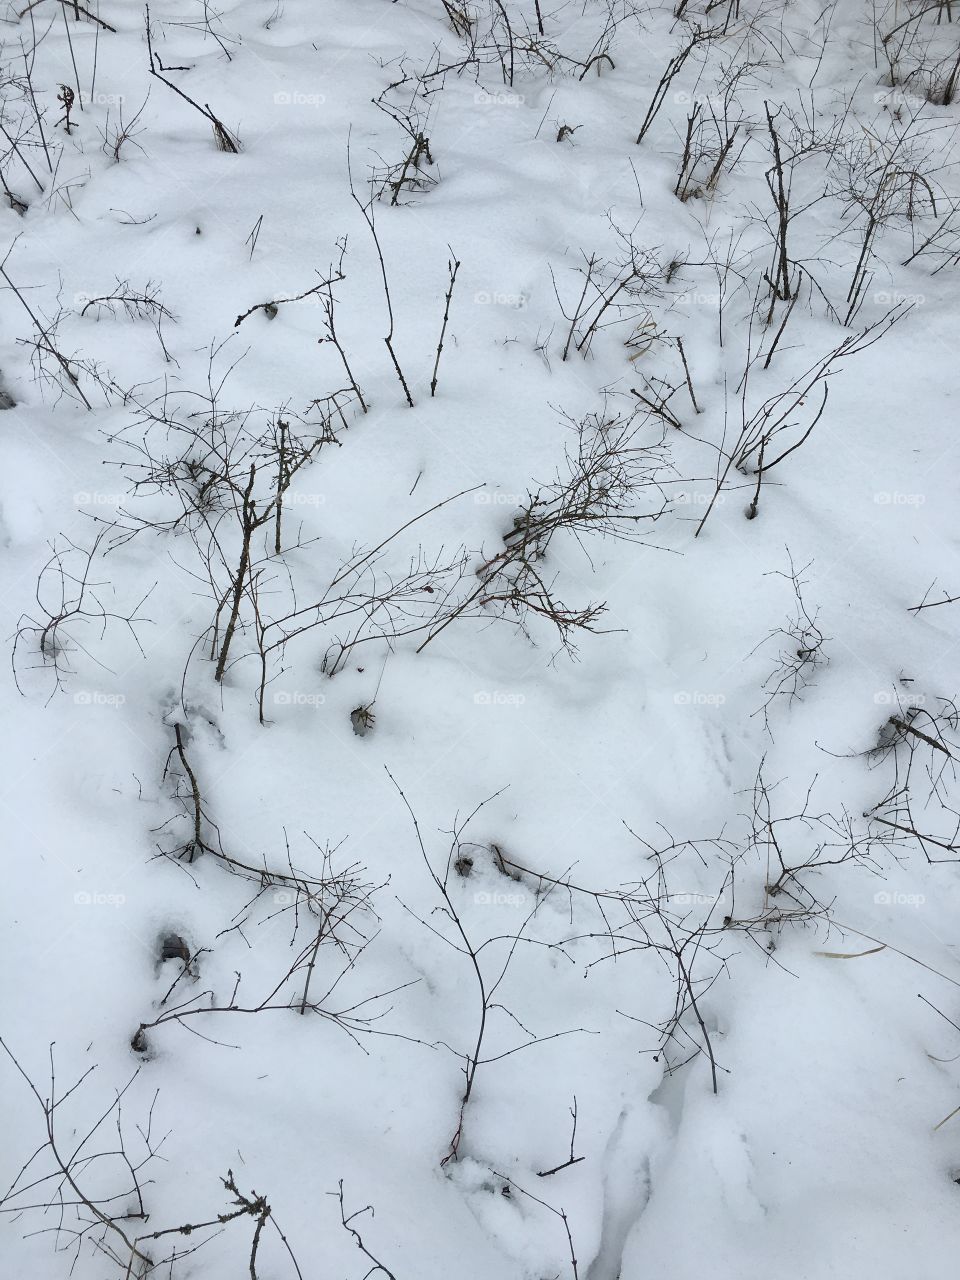 Young growth poking through the snow.